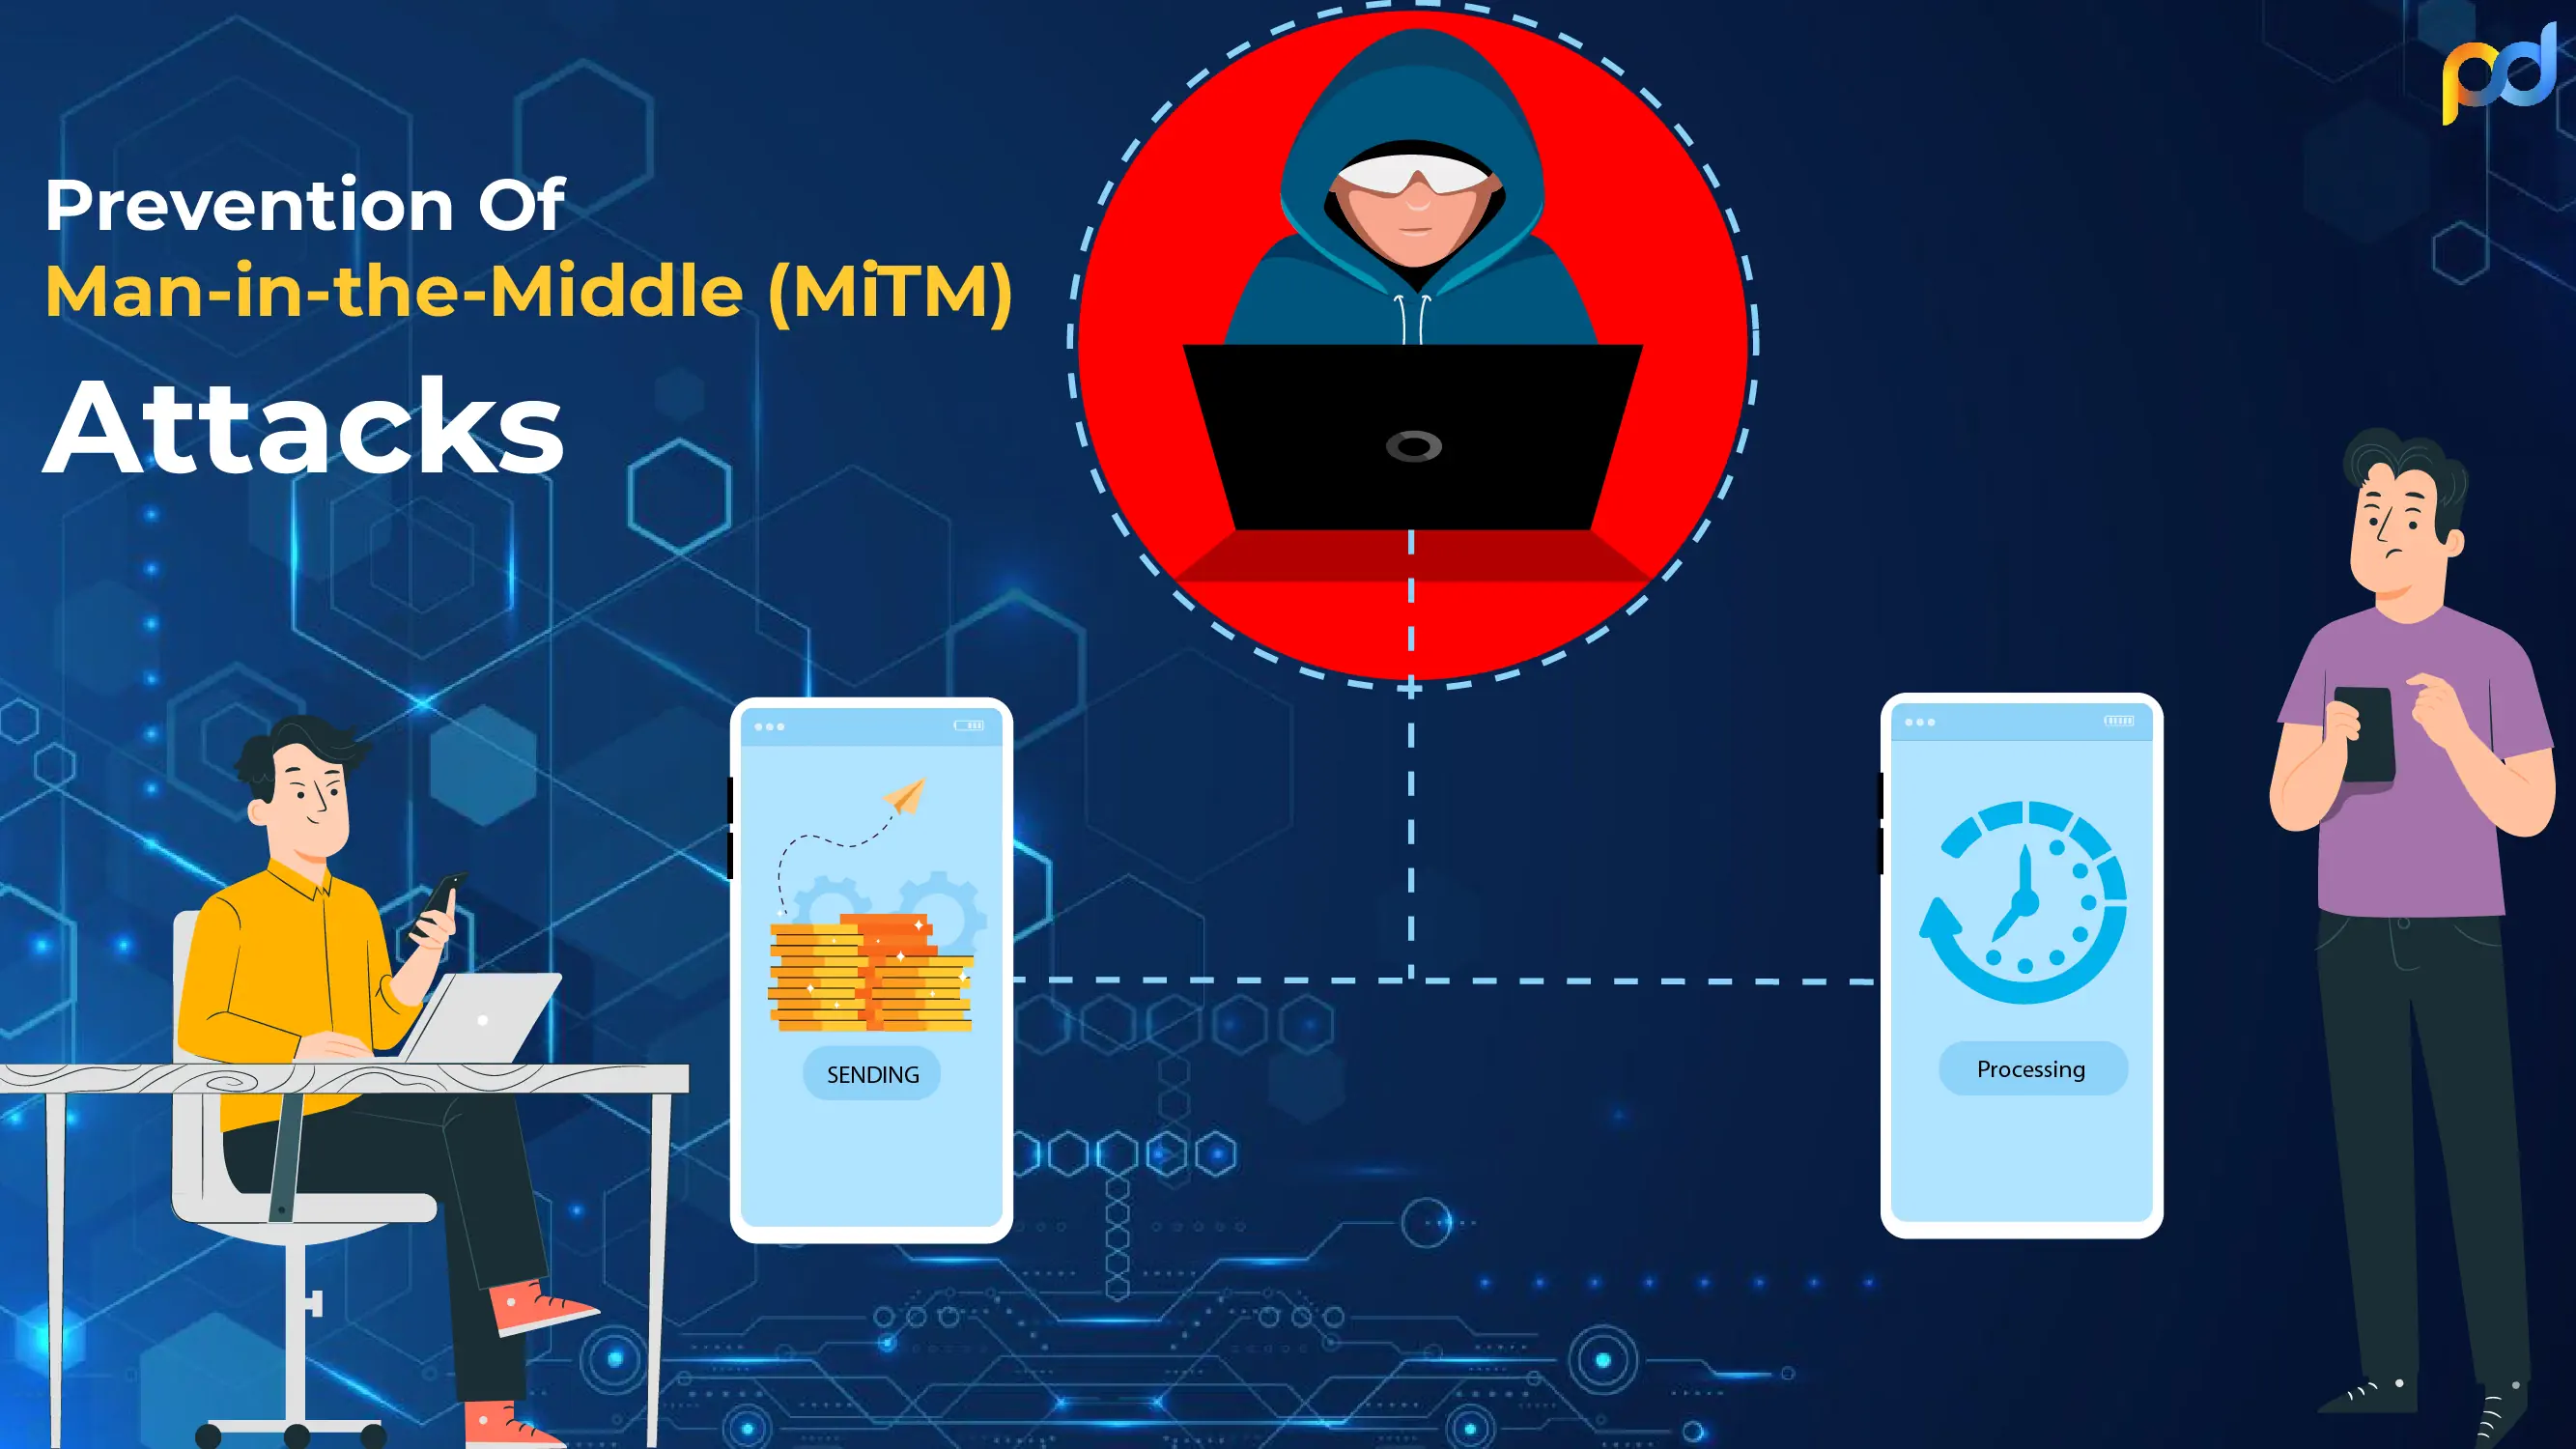 man-in-the-middle-attack-mitm-prevention